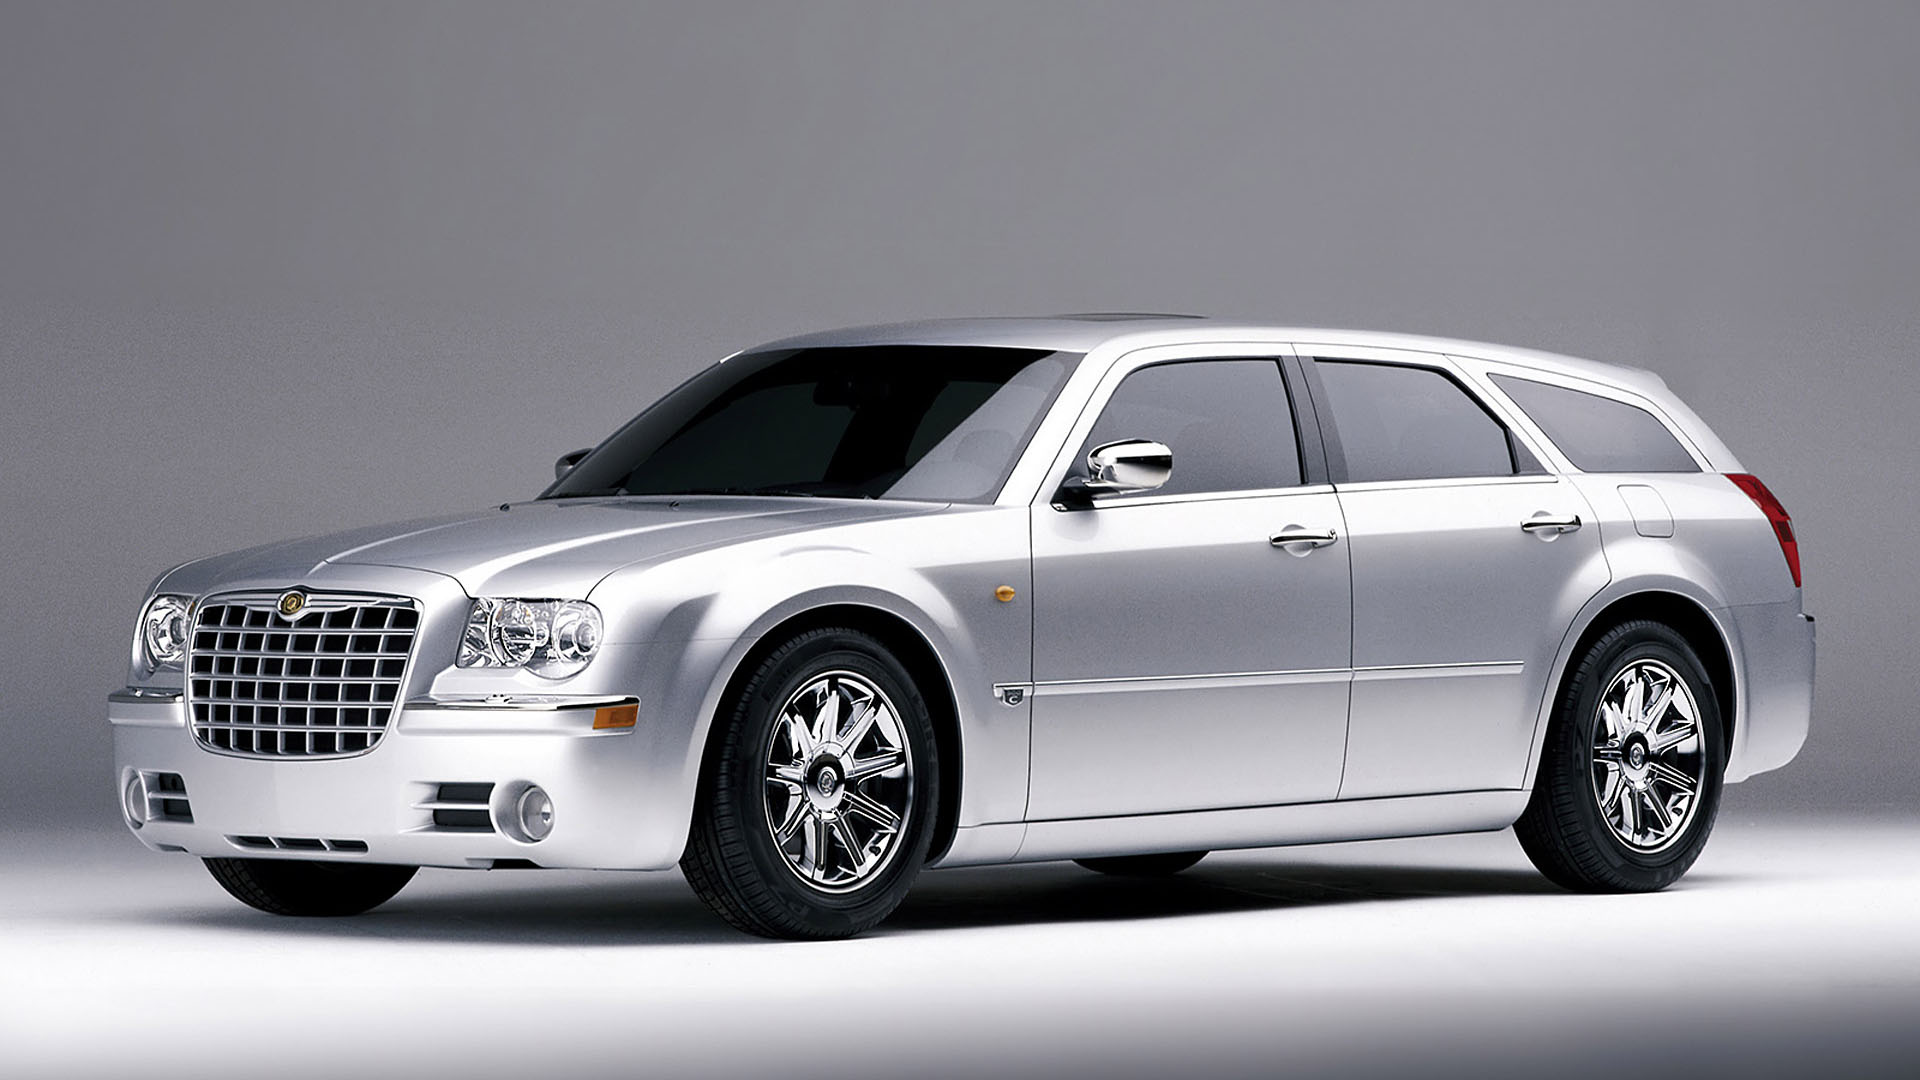 Chrysler C Touring Concept Car Full-Size Luxury Silver Car Station Wagon HD